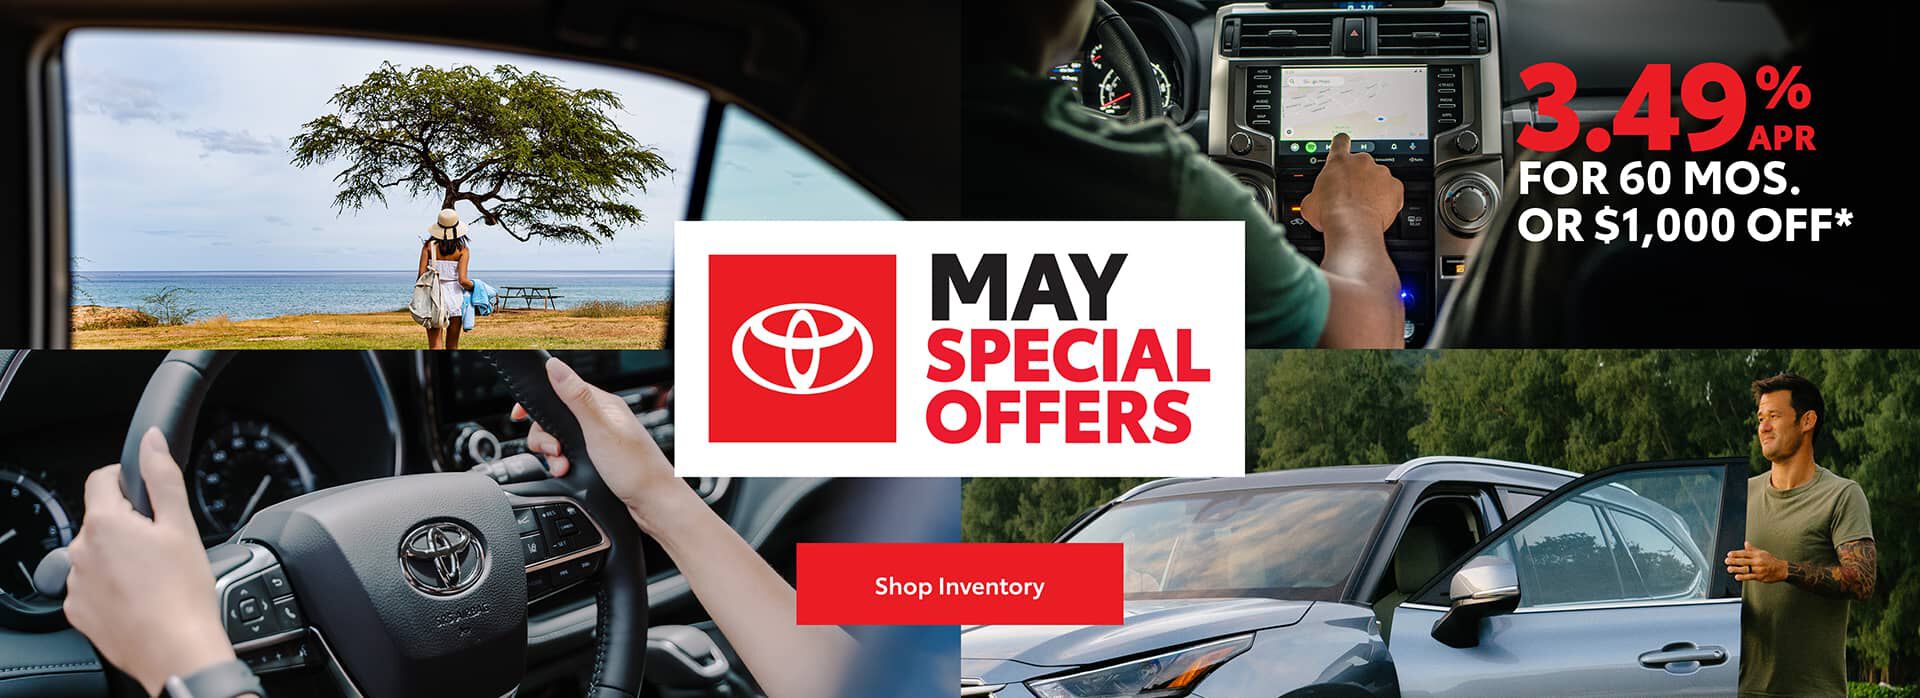 May Special Offers